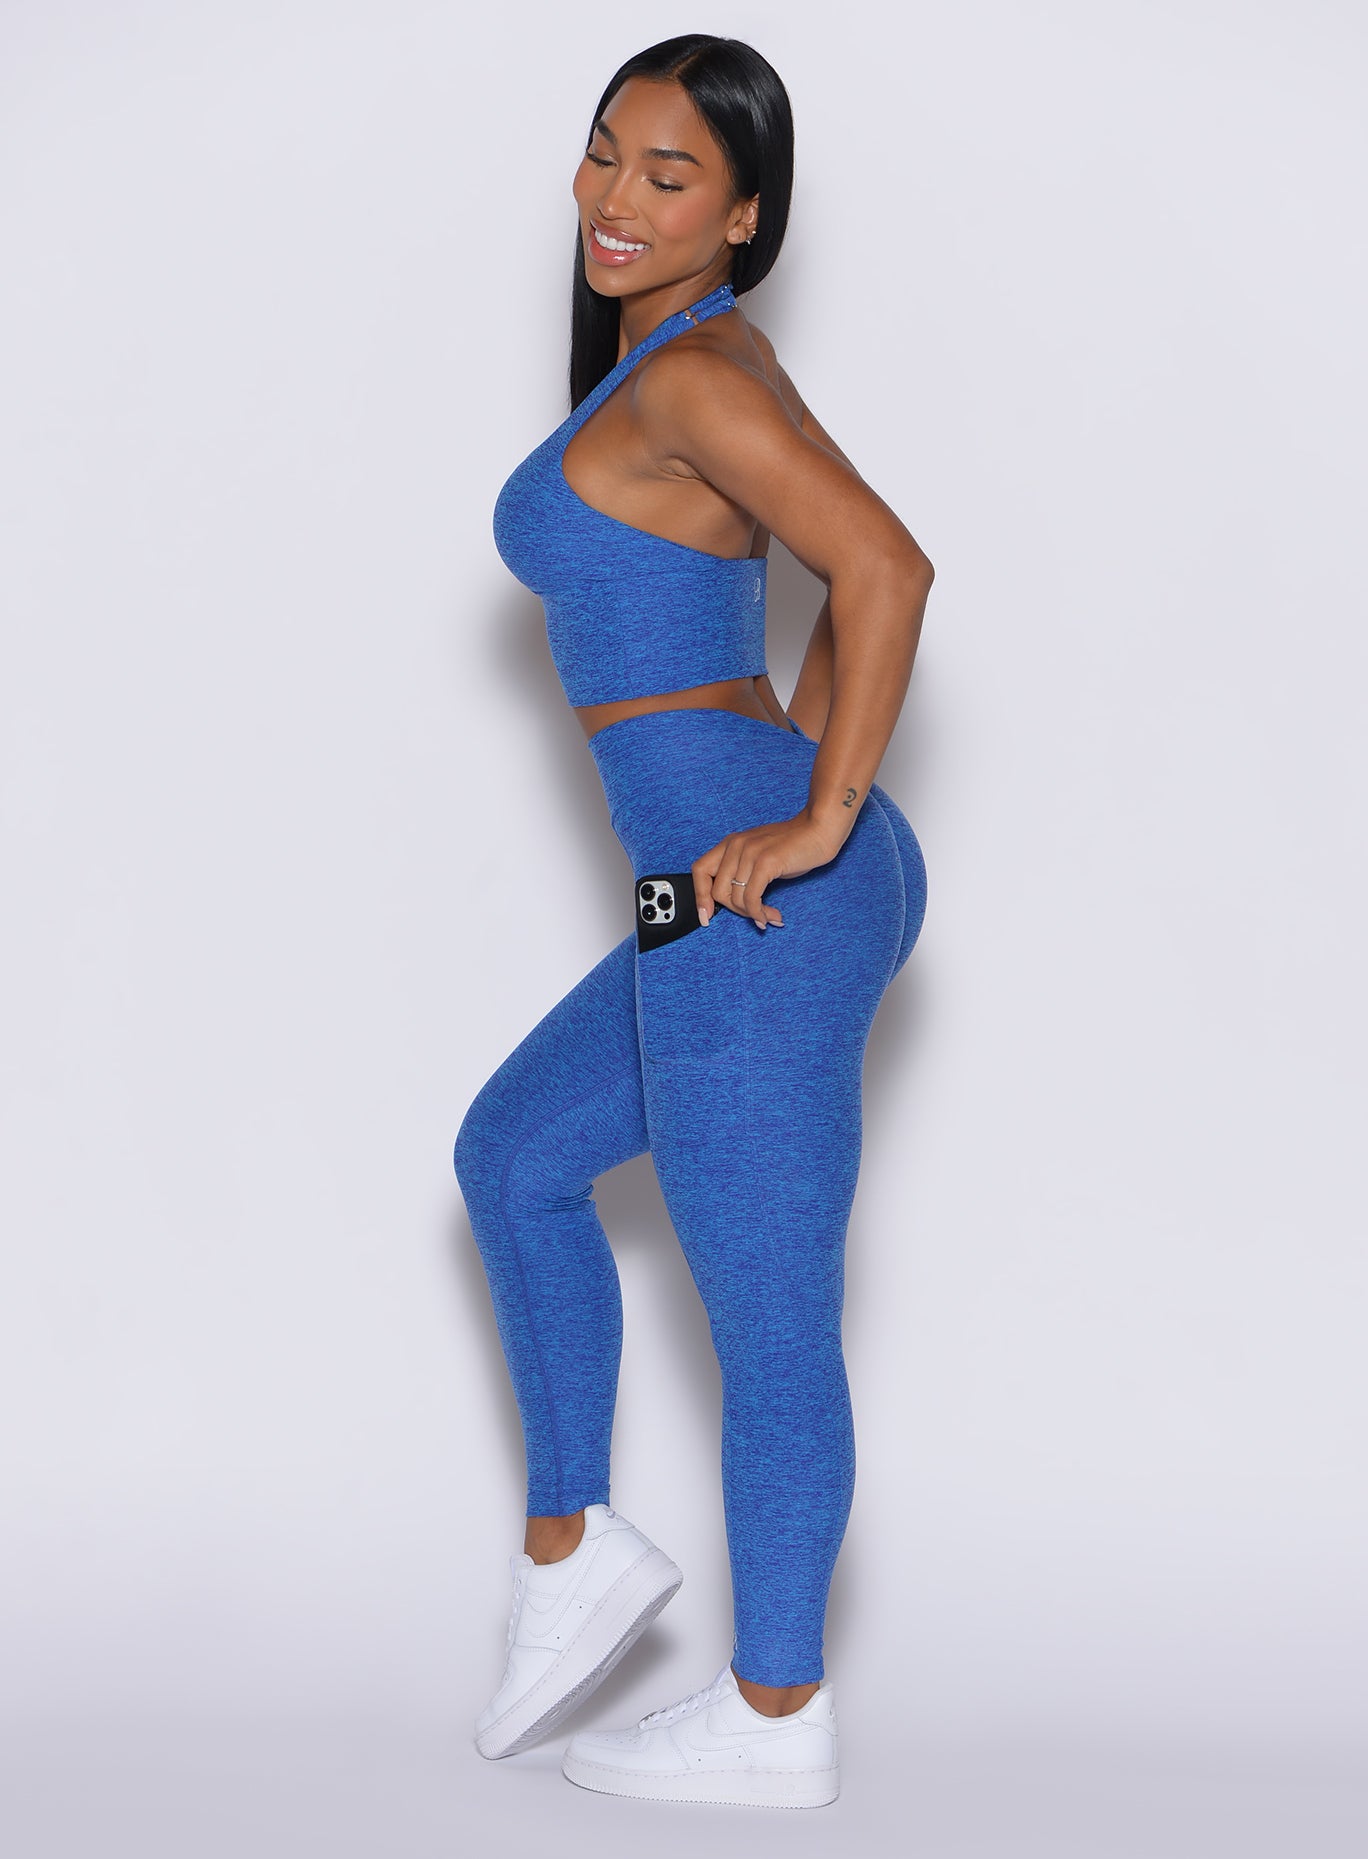 left side profile picture of a model smiling and wearing our V back leggings in Neon blue rave color along with a matching bra